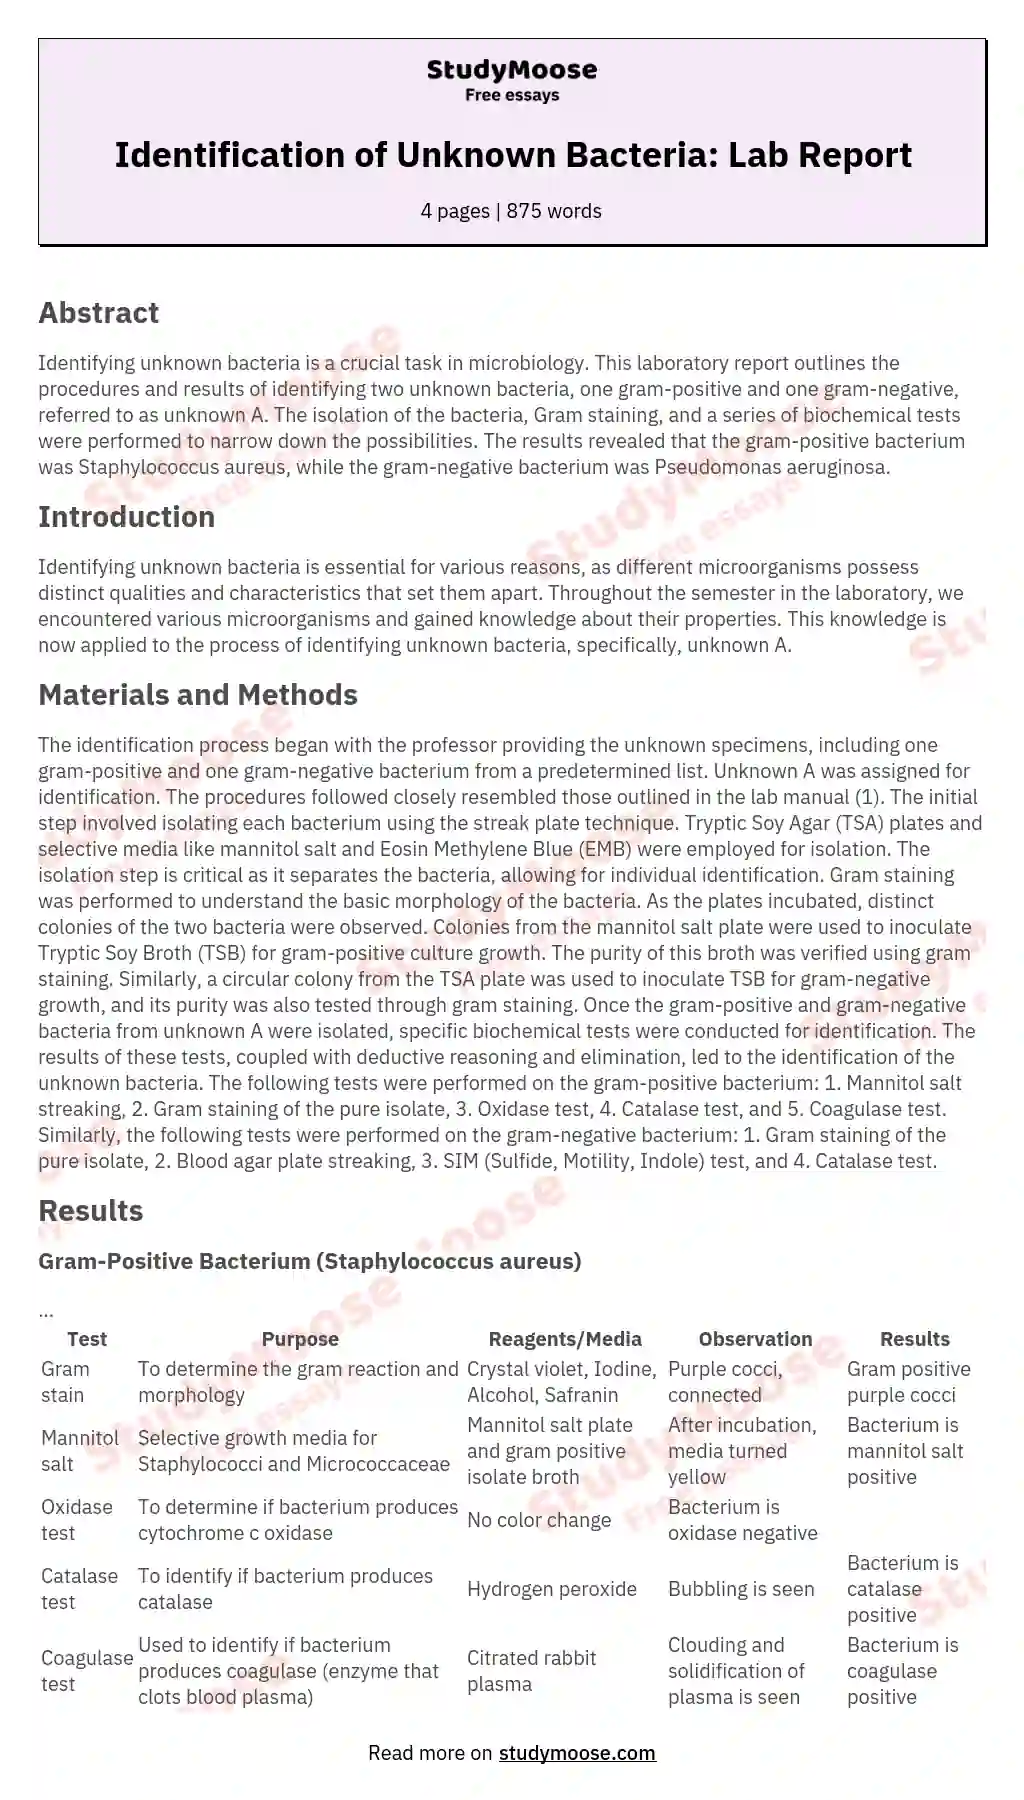 Identification of Unknown Bacteria: Lab Report essay